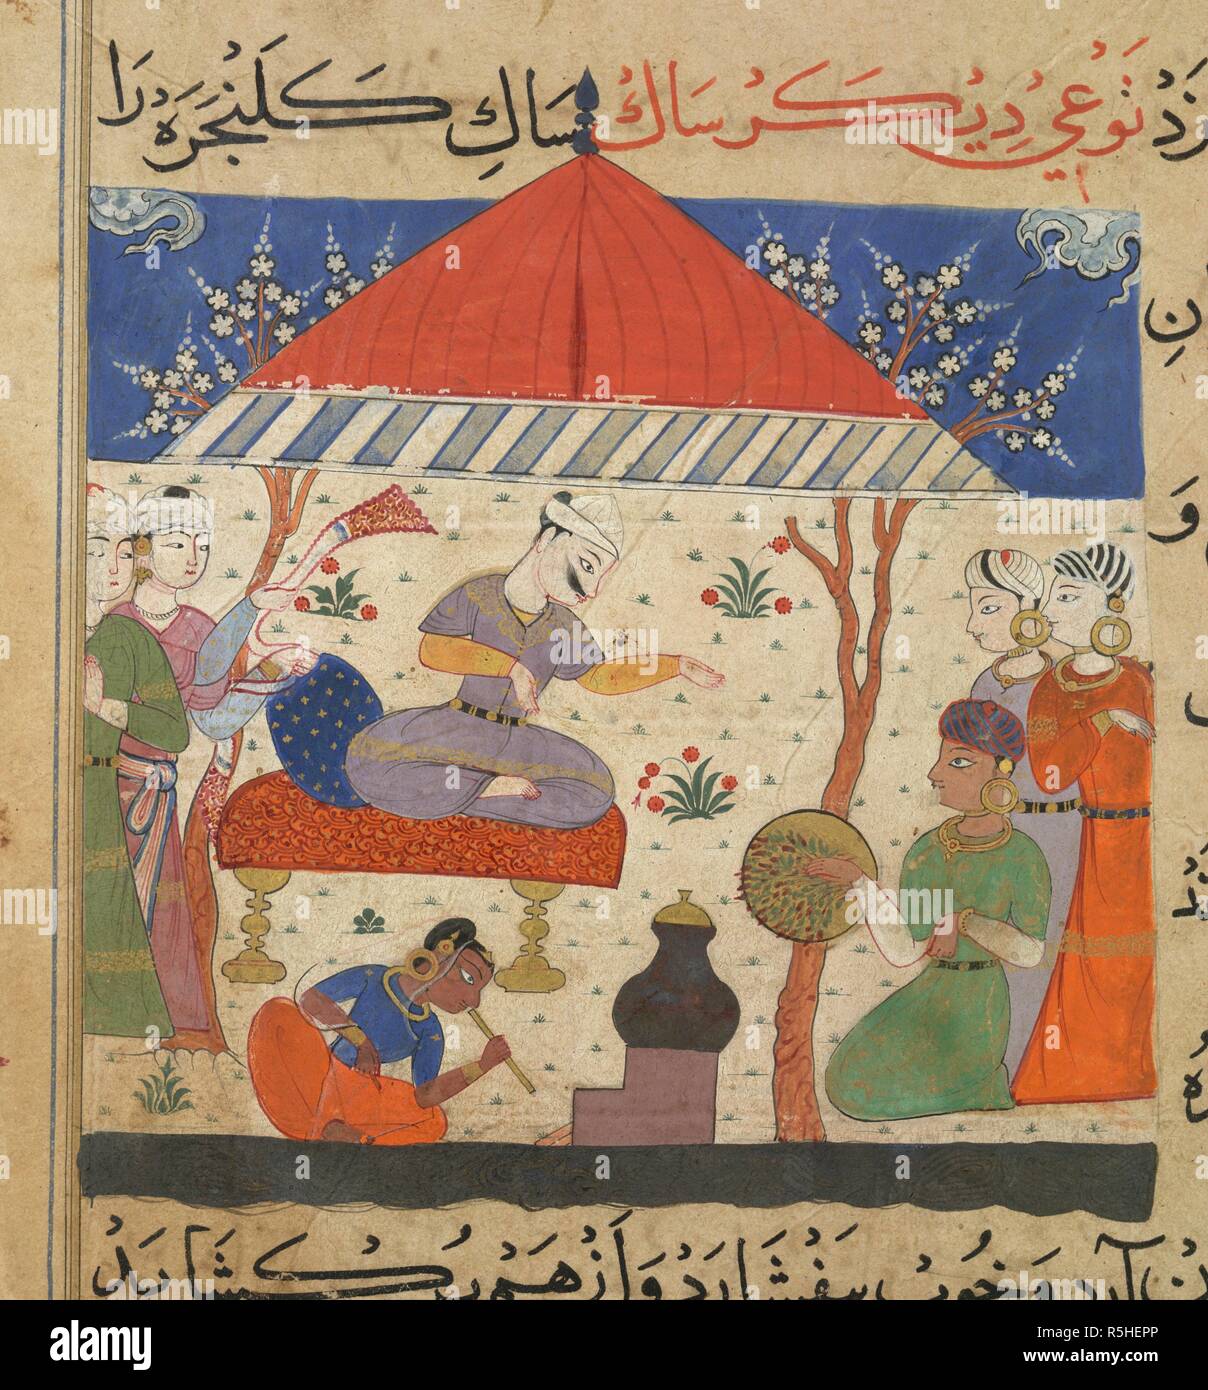 Vegetables being cooked. The Ni'matnama-i Nasir al-Din Shah. A manuscript o. 1495 - 1505. Vegetables being cooked for the Sultan Ghiyath al-Din. Opaque watercolour. Sultanate style.  Image taken from The Ni'matnama-i Nasir al-Din Shah. A manuscript on Indian cookery and the preparation of sweetmeats, spices etc.  Originally published/produced in 1495 - 1505. . Source: I.O. ISLAMIC 149, f.79v. Language: Persian. Stock Photo